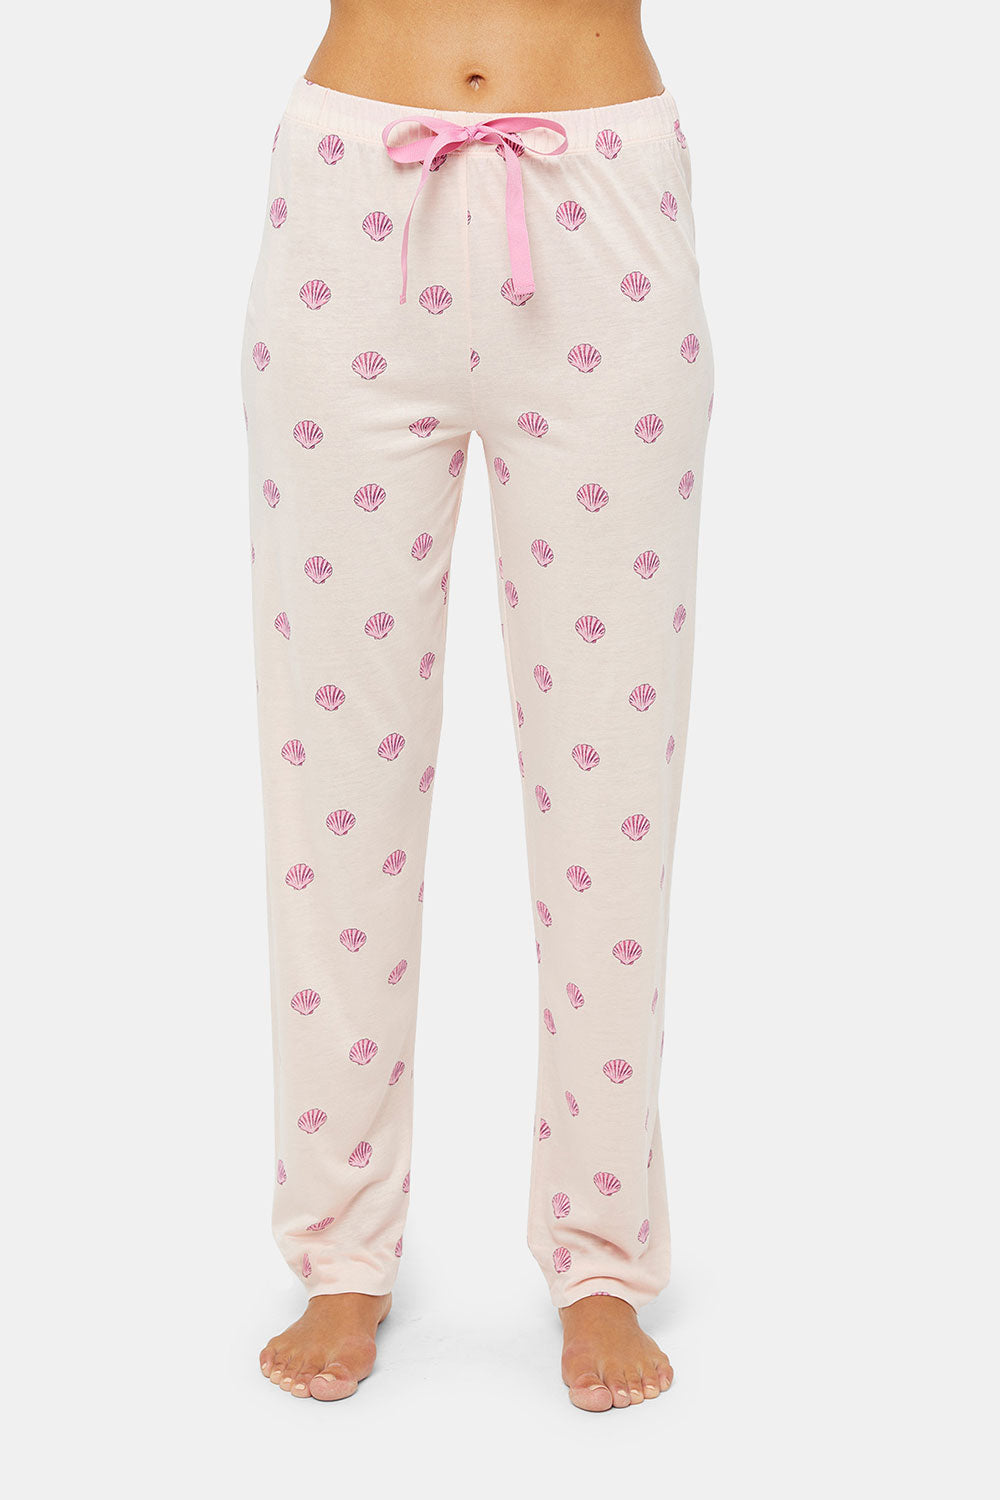 COQUILLAGE LONG BUTTONED PAJAMA